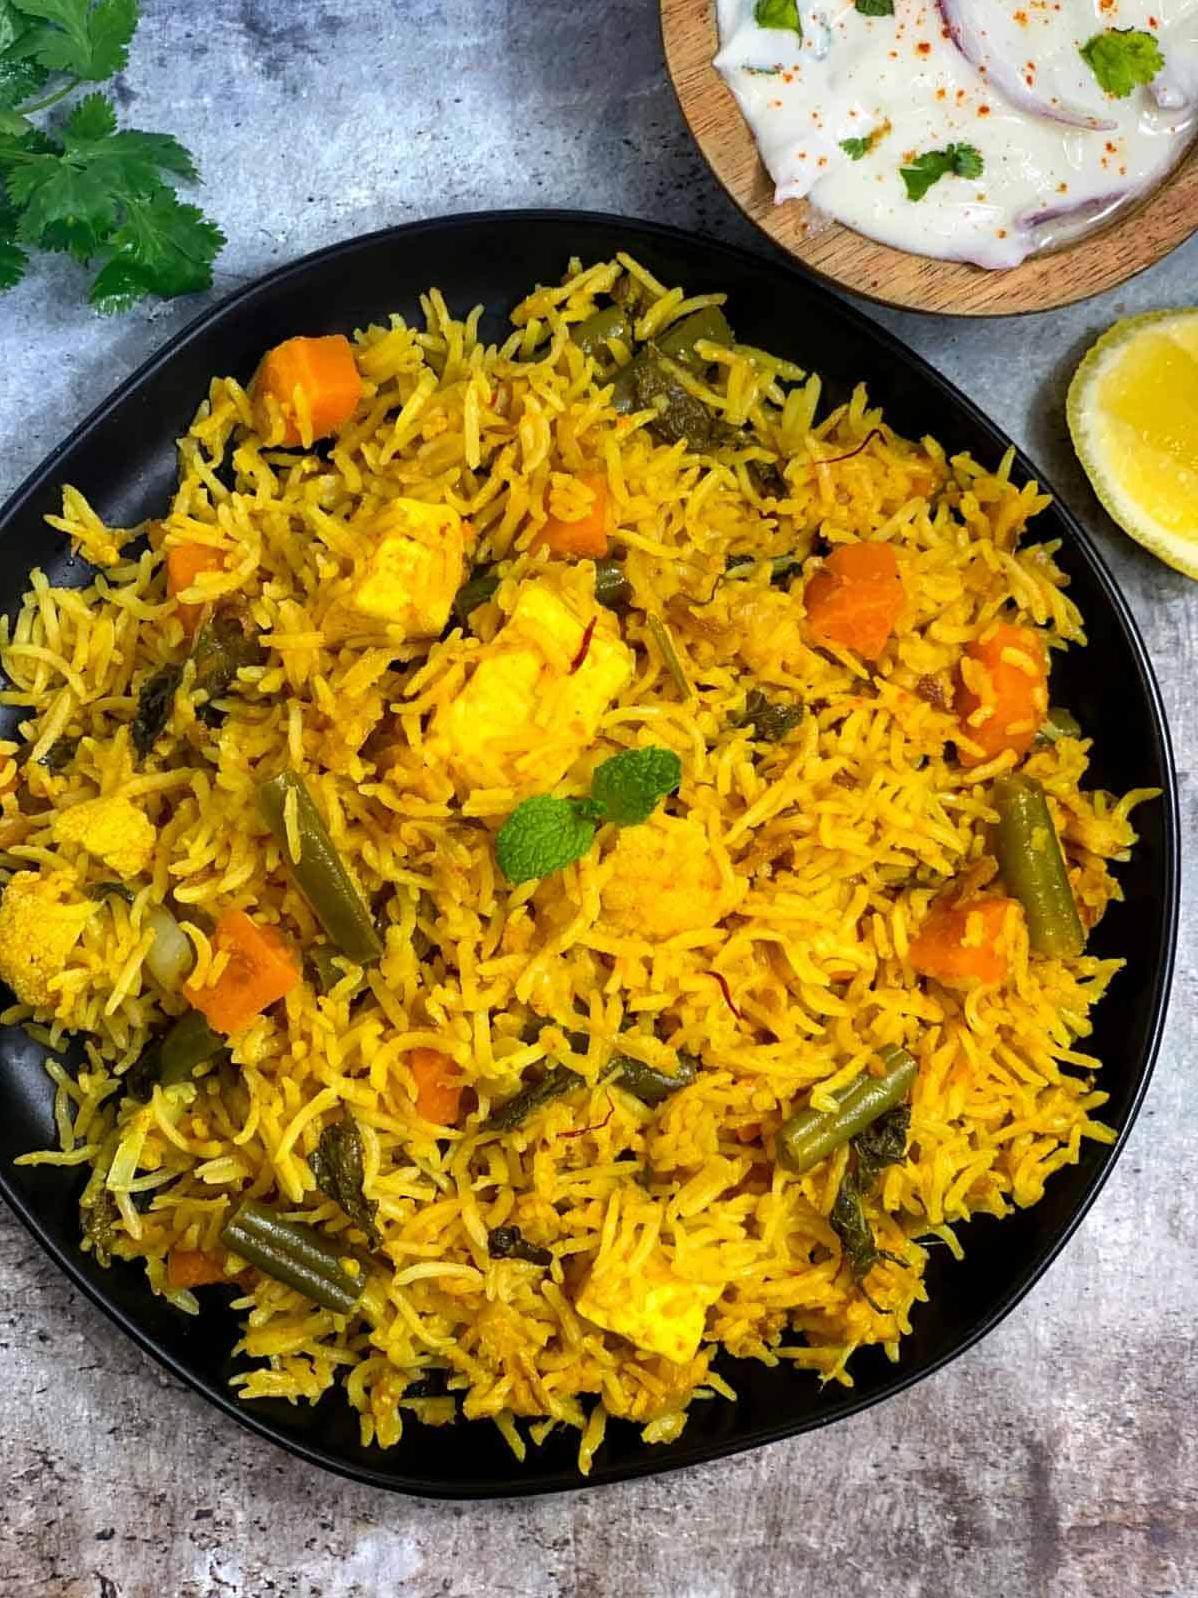  Eat the rainbow with this vibrant, layered and flavorful vegetarian biryani!